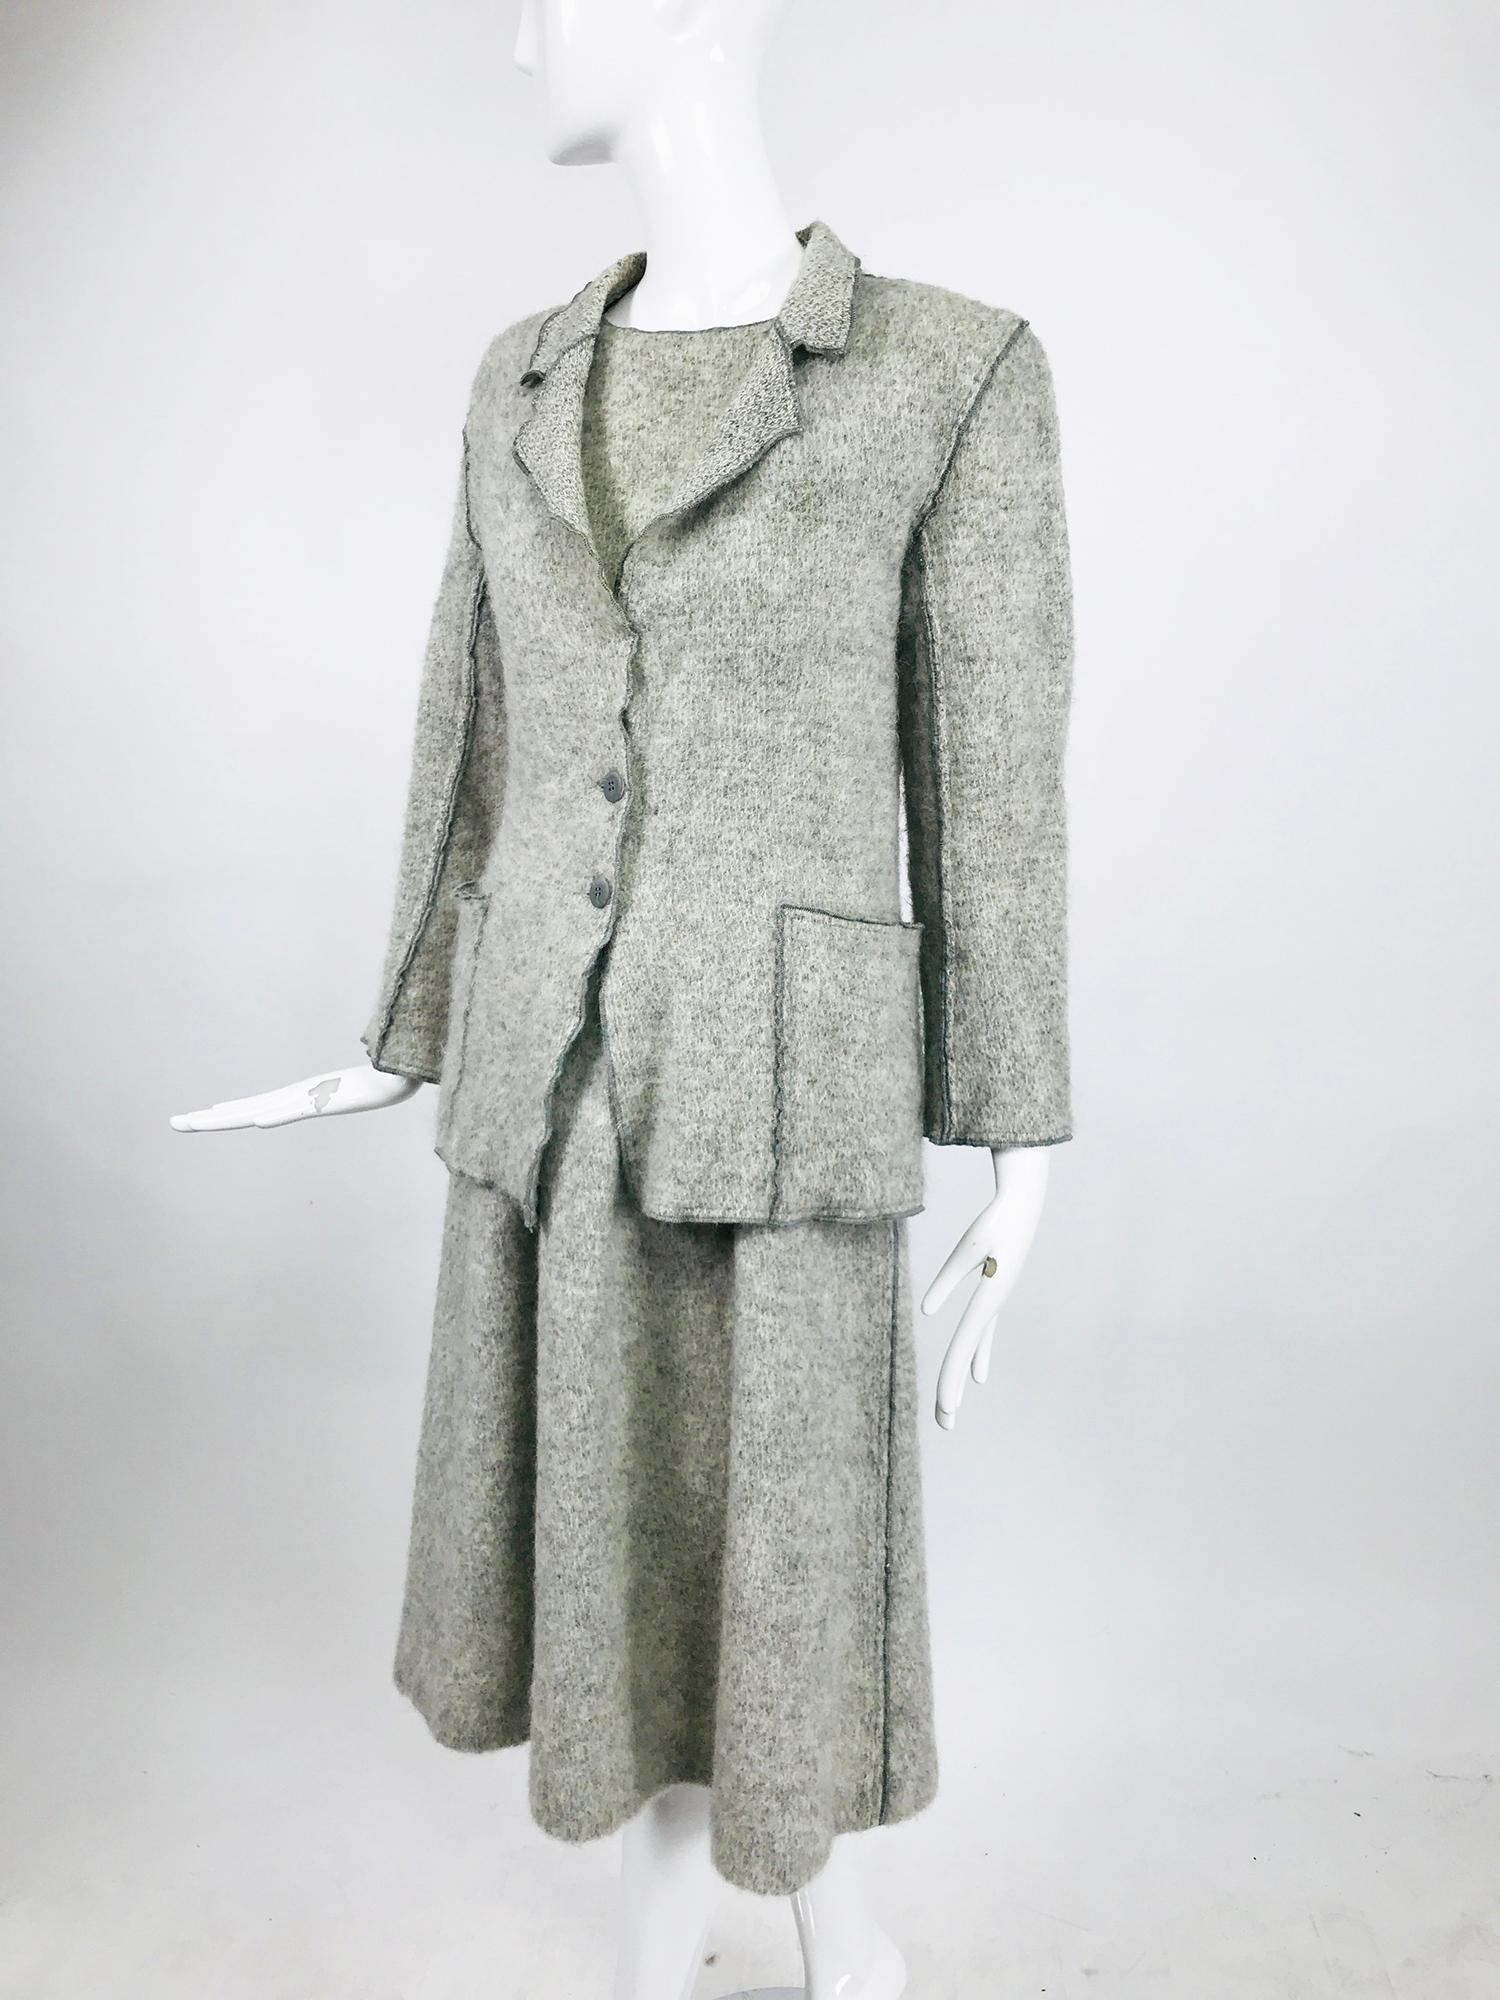 Vintage Geoffrey Beene Beene Bag knitted mohair jacket and dress from the 1970s. The Beene Bag line of women’s wear used the same silhouettes as his couture line. This two piece set is light grey shaggy mohair knit, both pieces are unlined. the